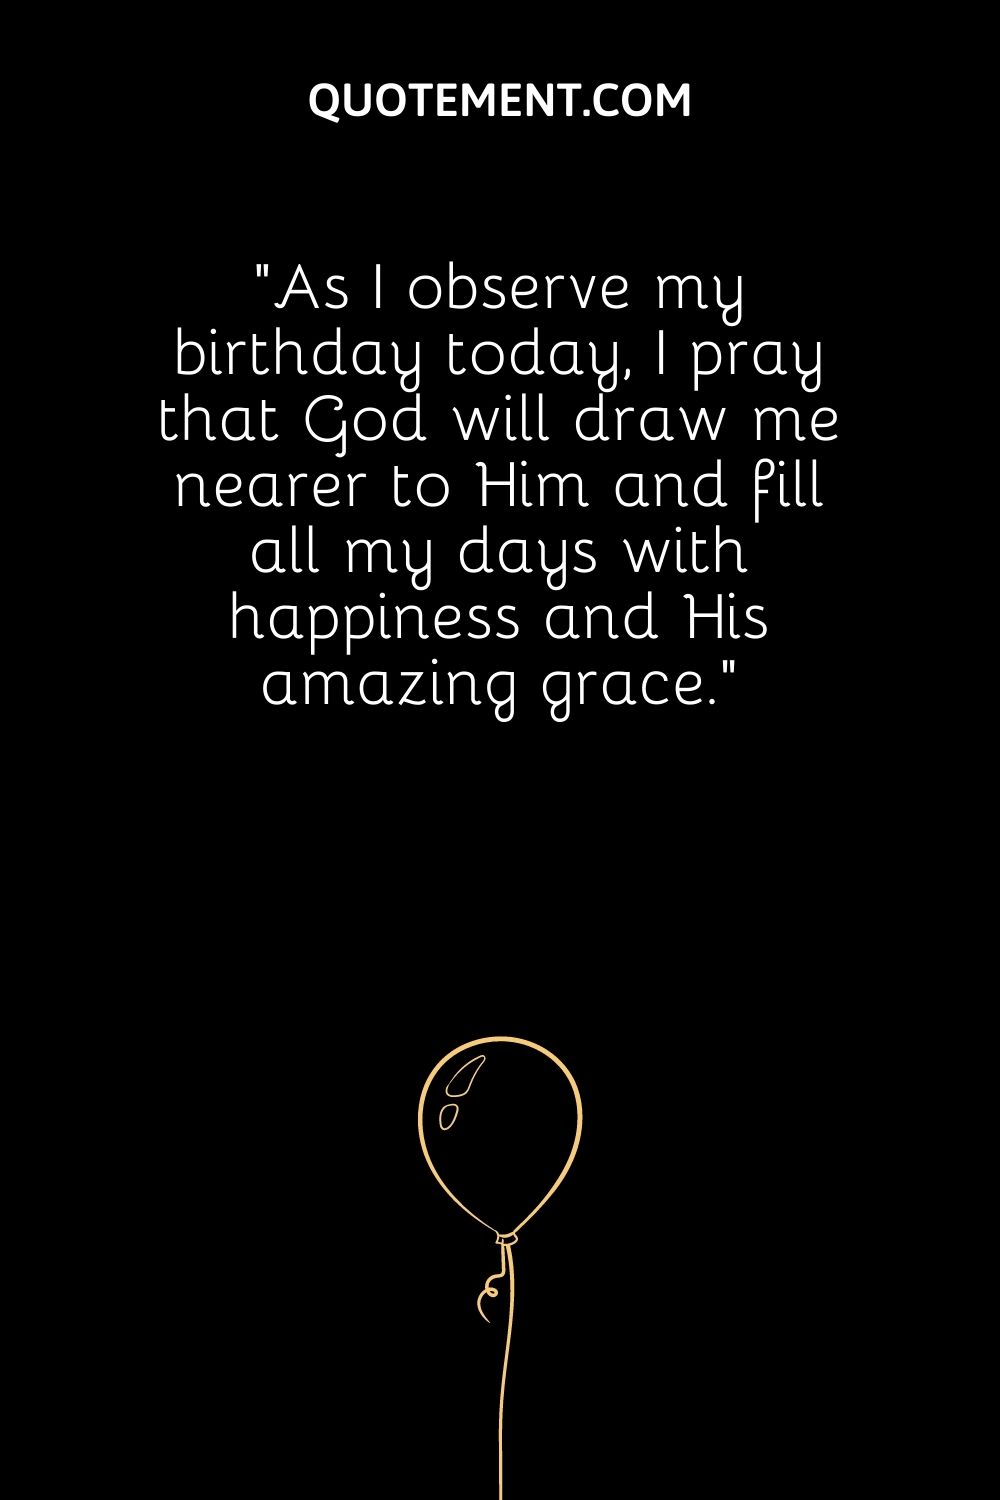 As I observe my birthday today, I pray that God will draw me nearer to Him and fill all my days with happiness and His amazing grace.